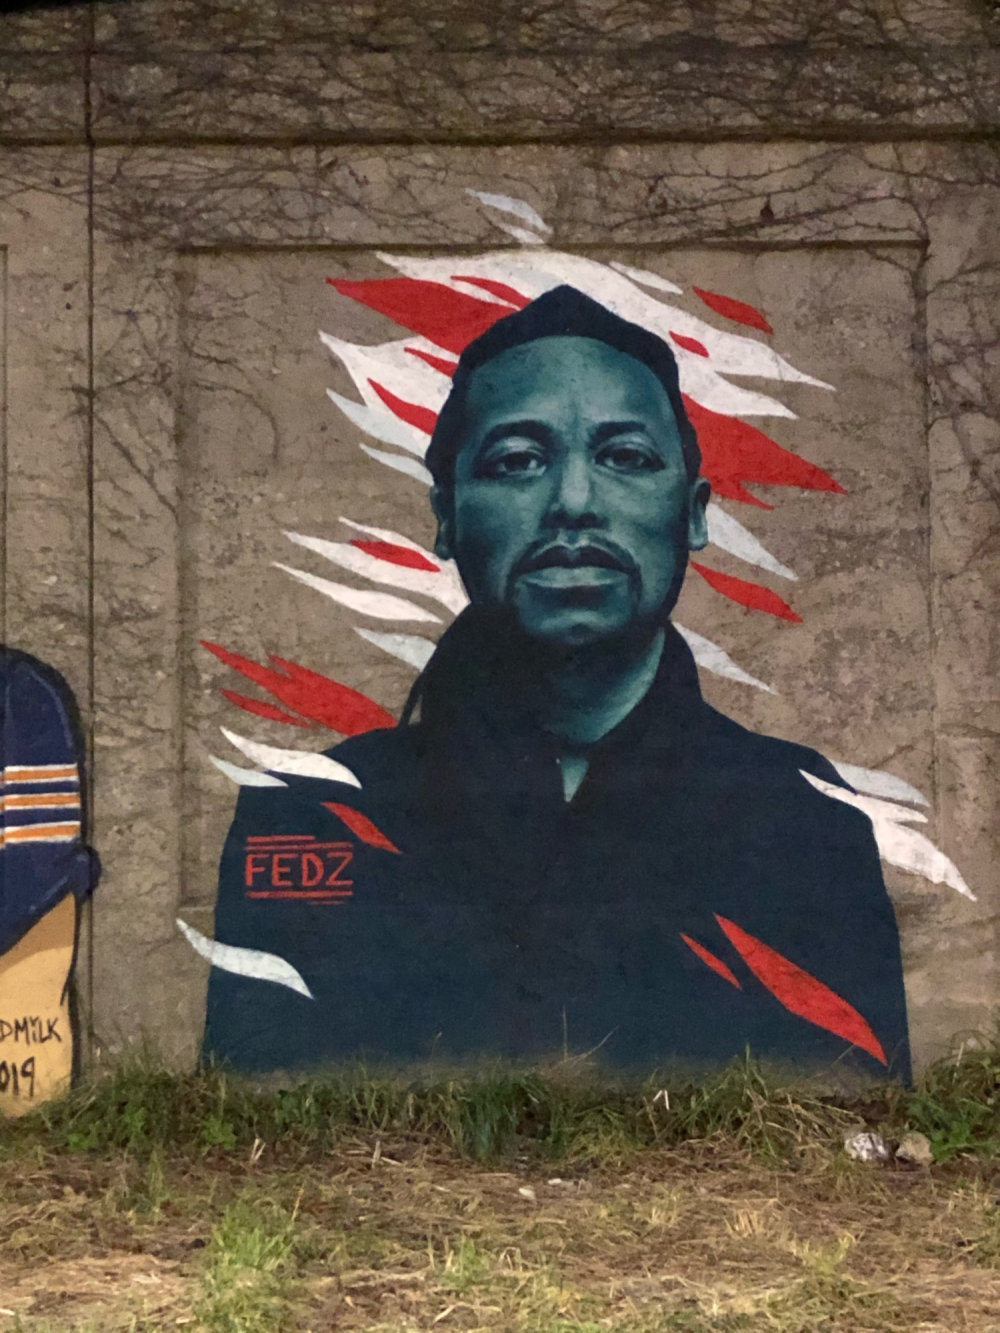 mural in Chicago by artist Fedz. Tagged: Lupe Fiasco, music